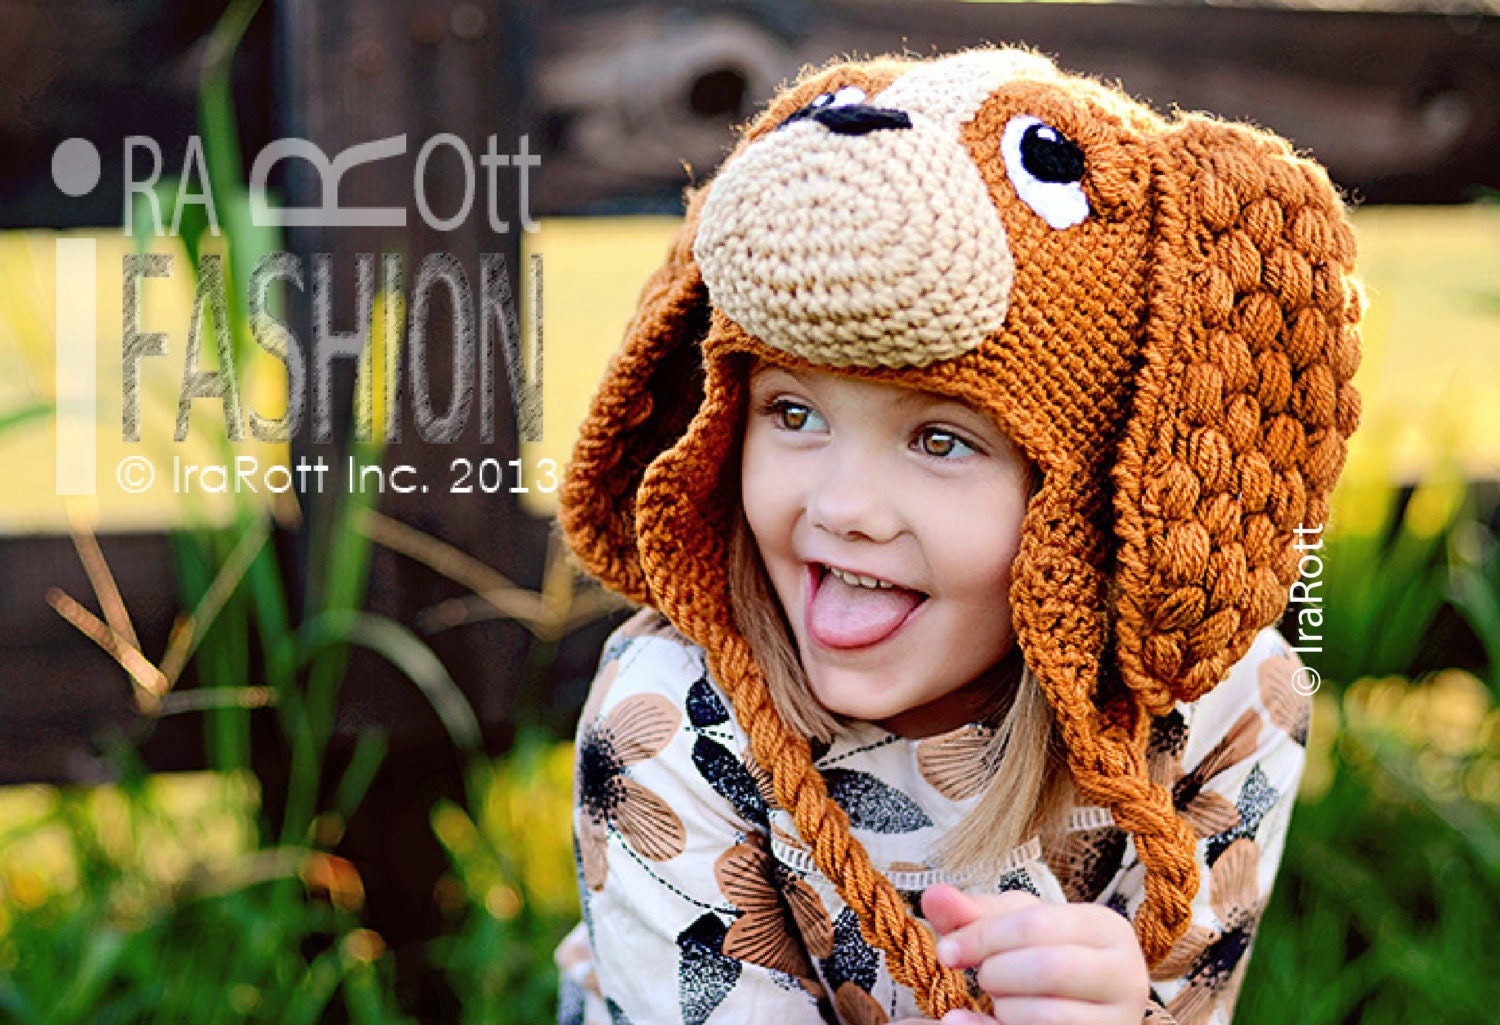 CoCo the Spaniel Hat, Handmade Crochet Puppy Dog Hat, Made to Order from Newborn  to Adult Sizes